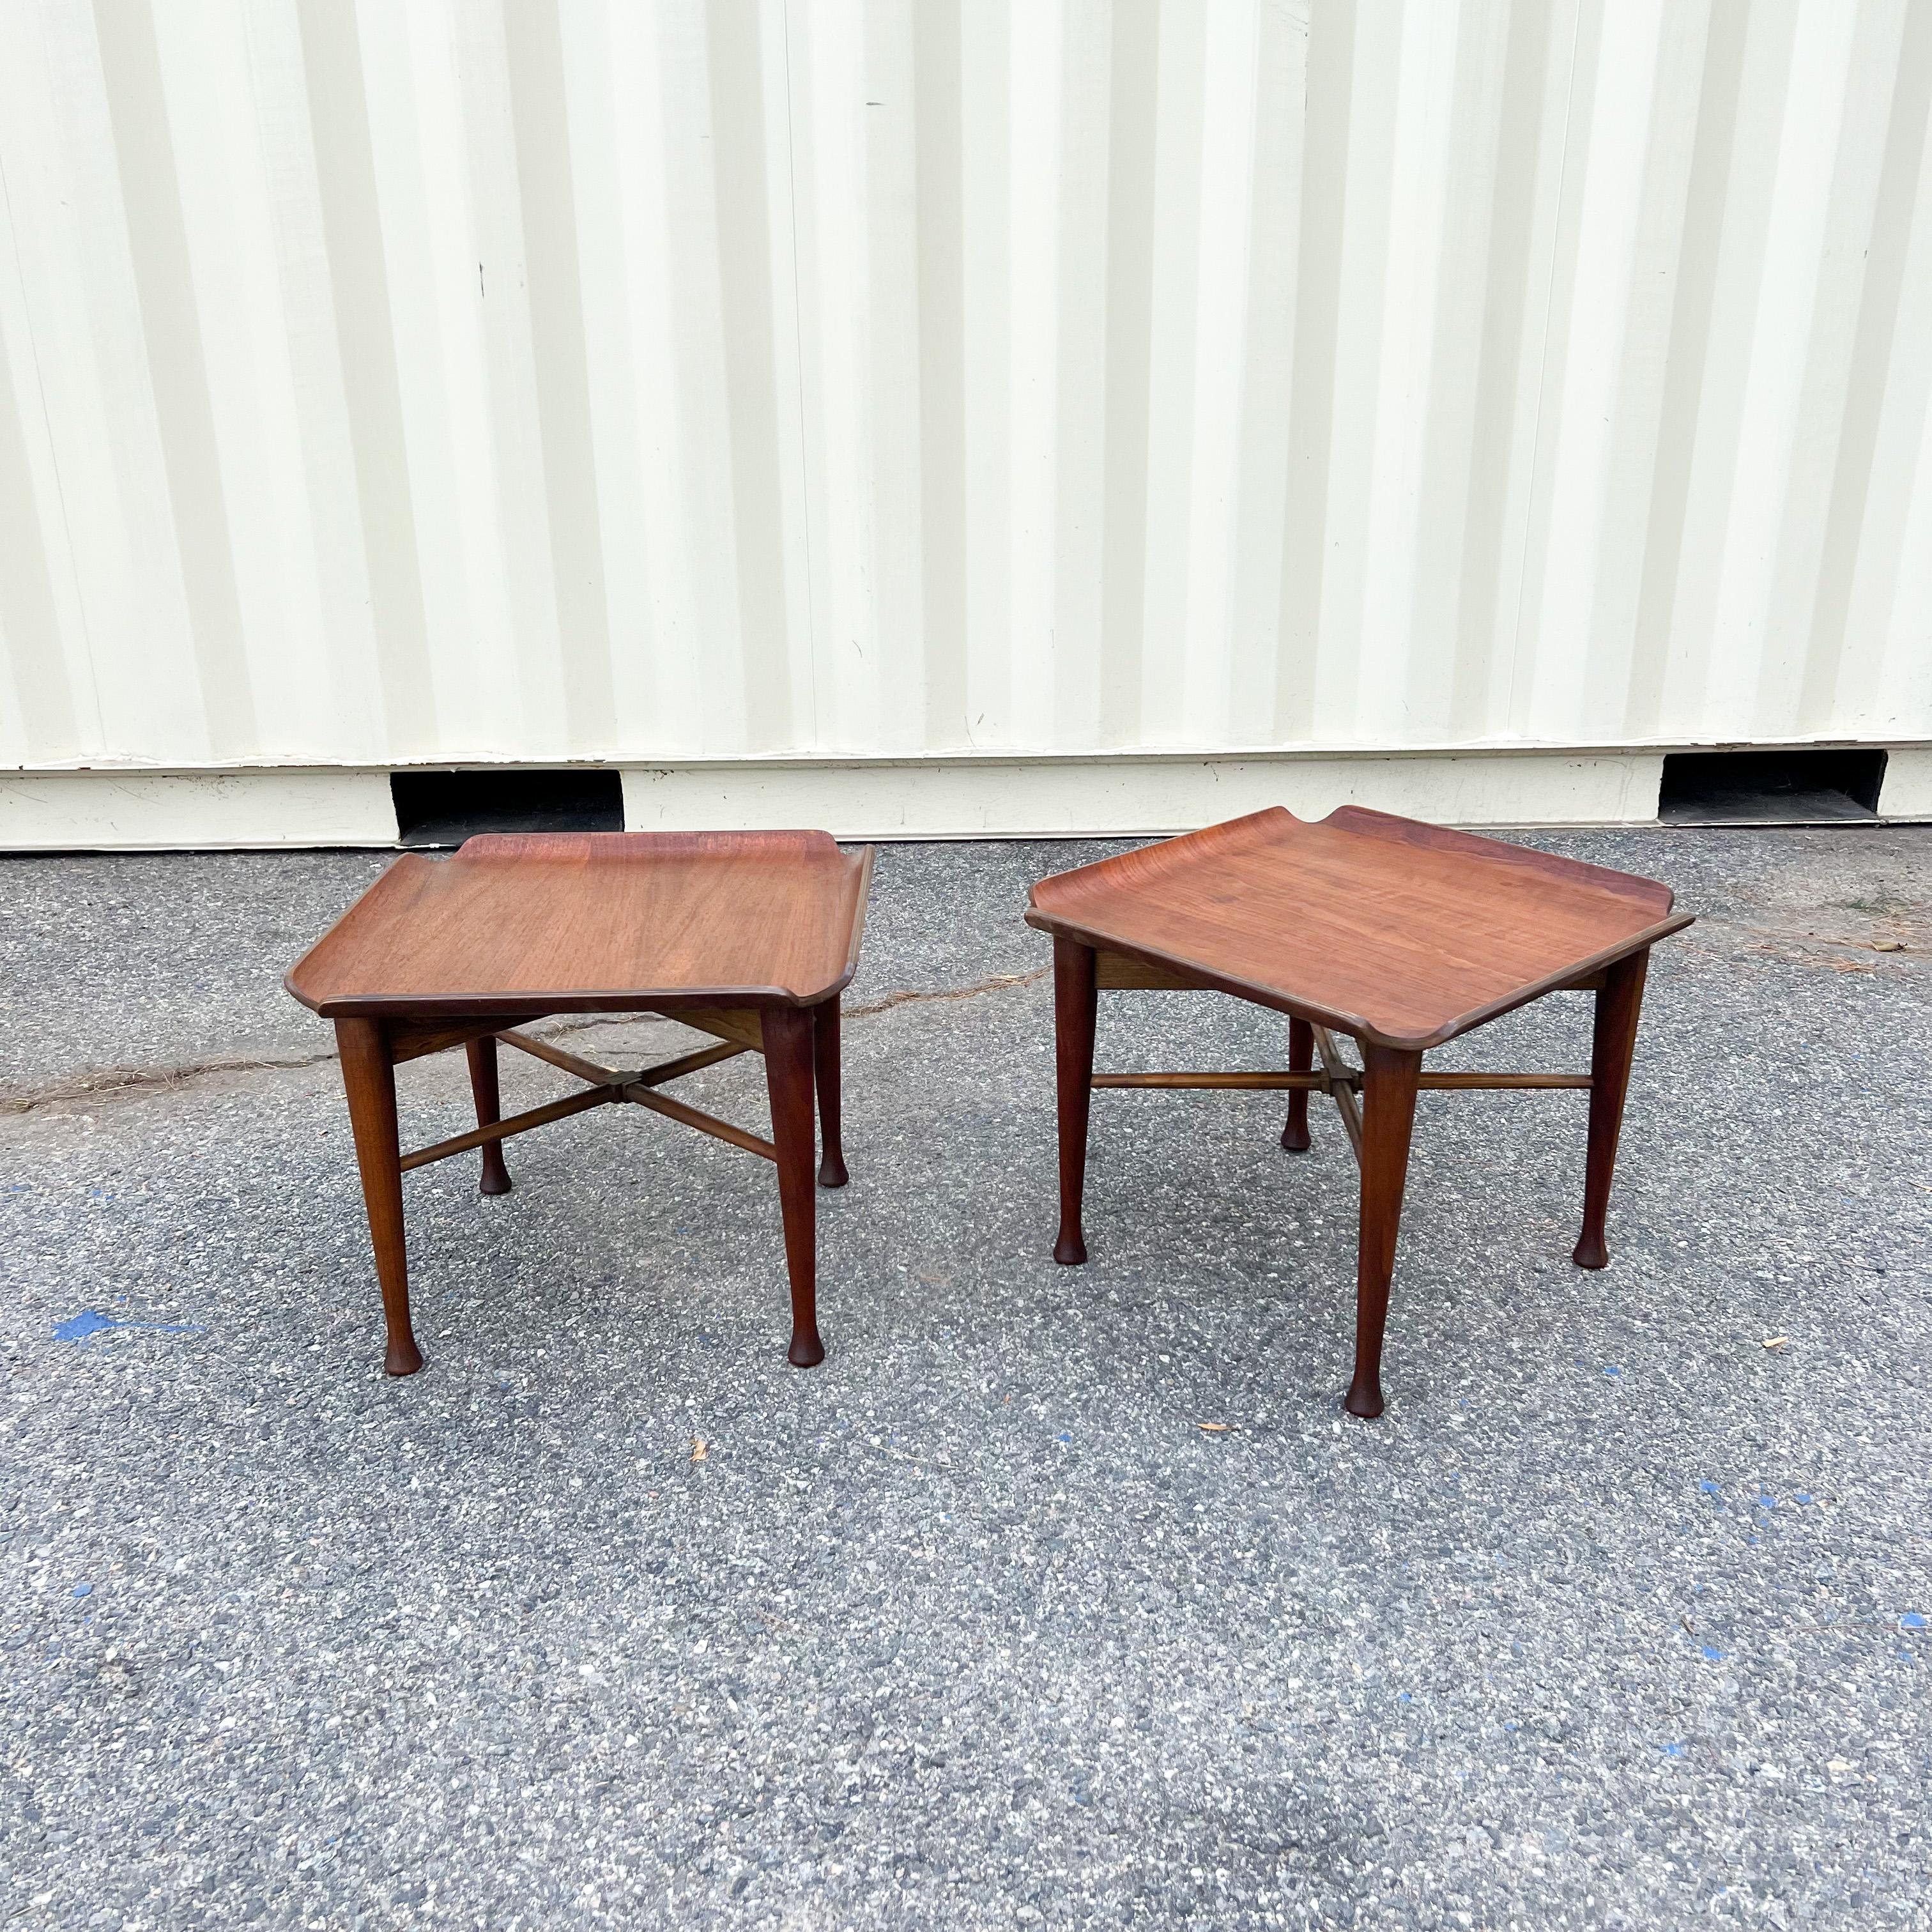 Pair of Mid-Century Modern solid walnut end tables with molded plywood tops - designed by Lawrence Peabody for Richardson Nemschoff.